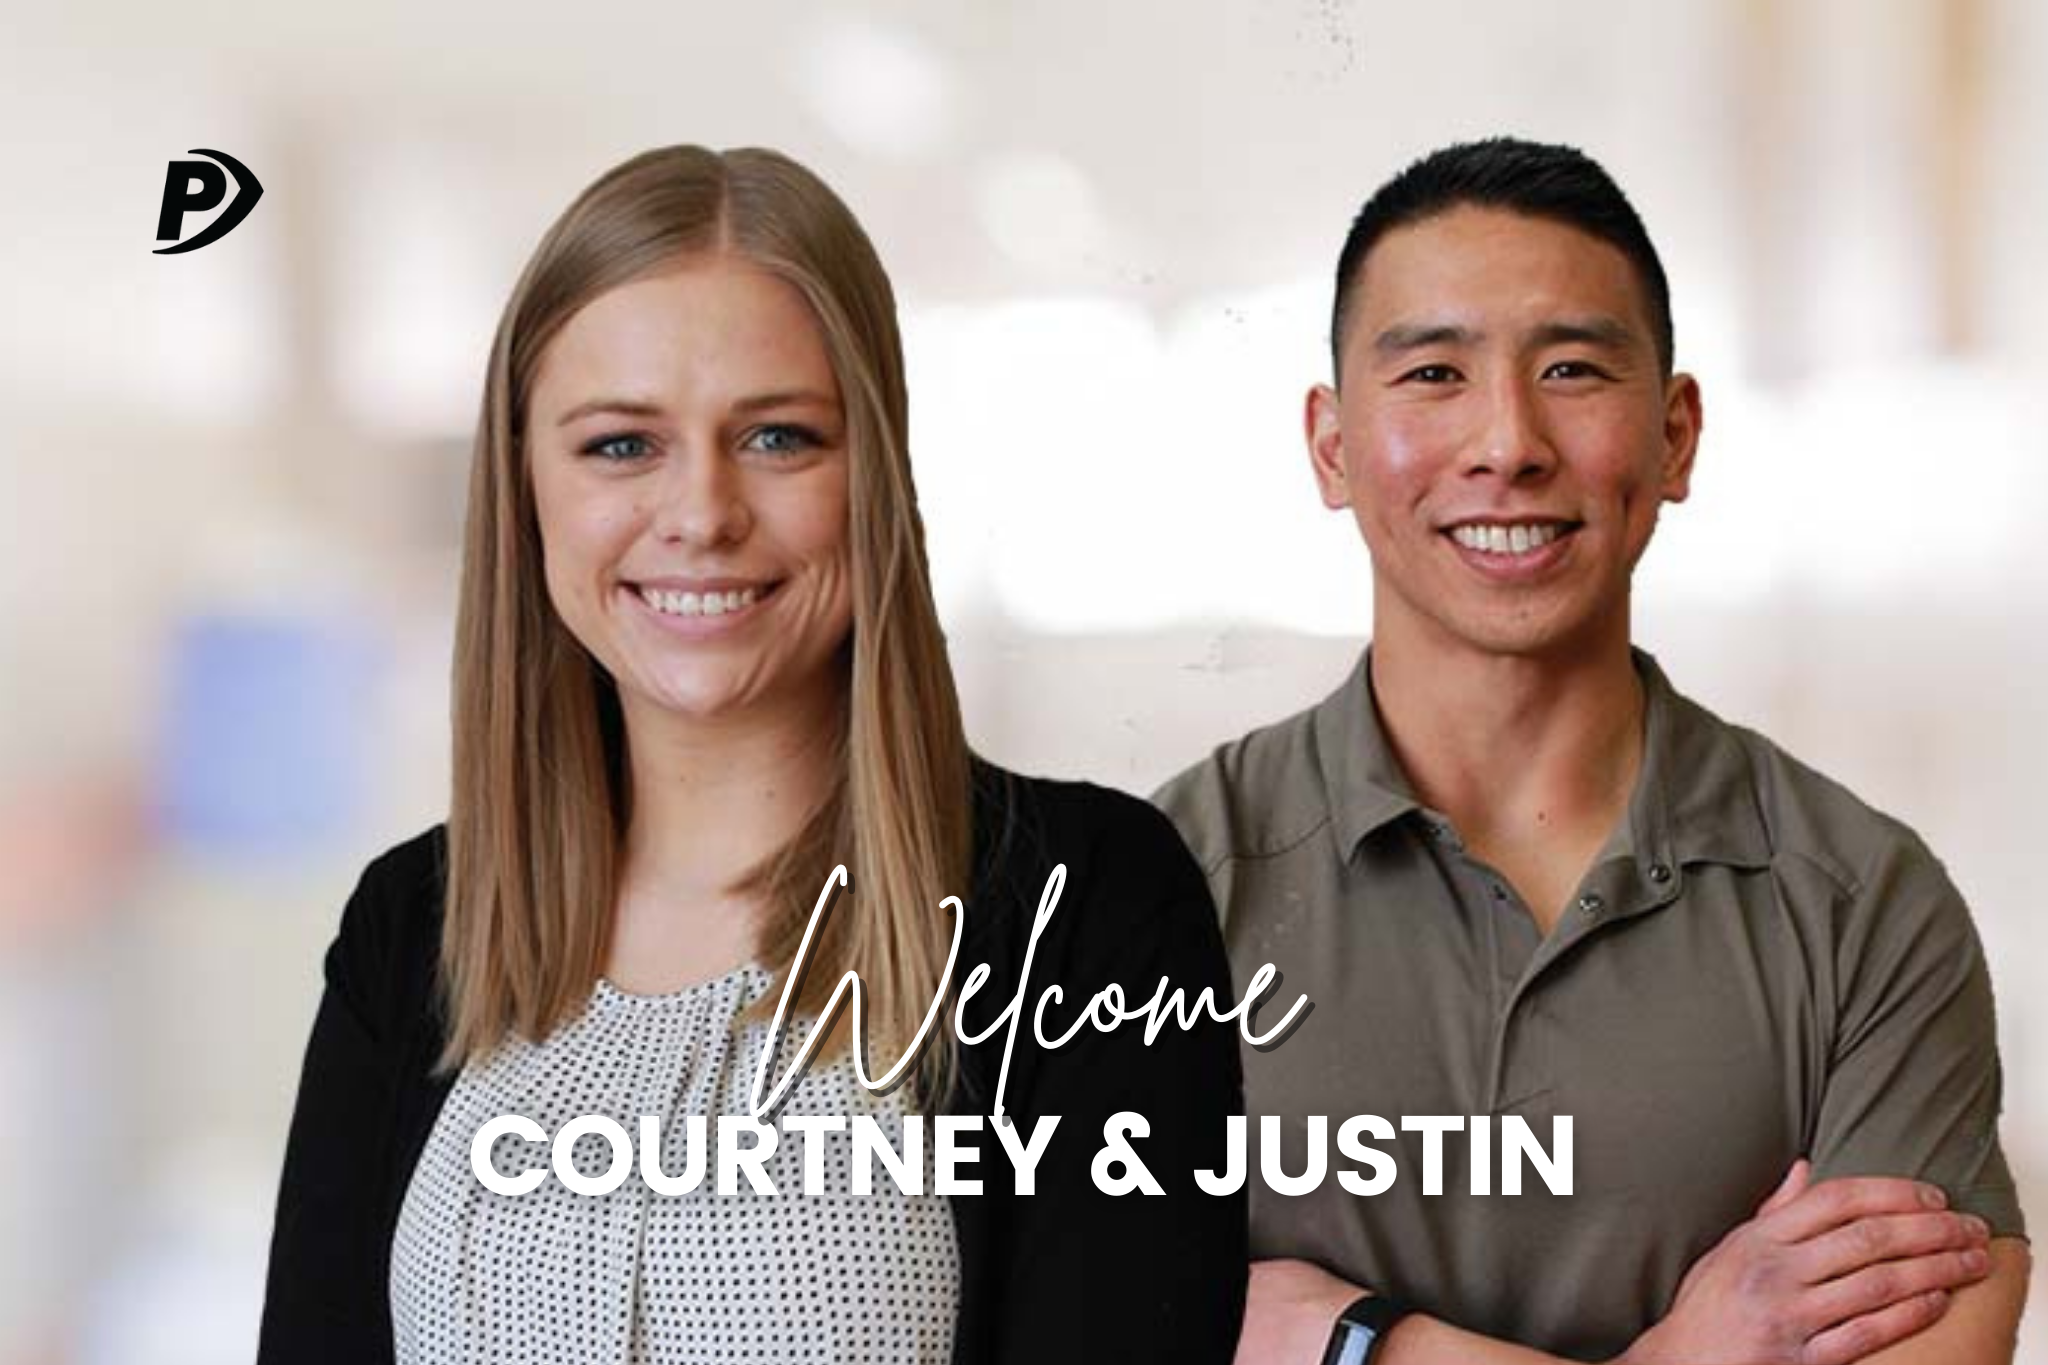 New Hires, Courtney & Justin